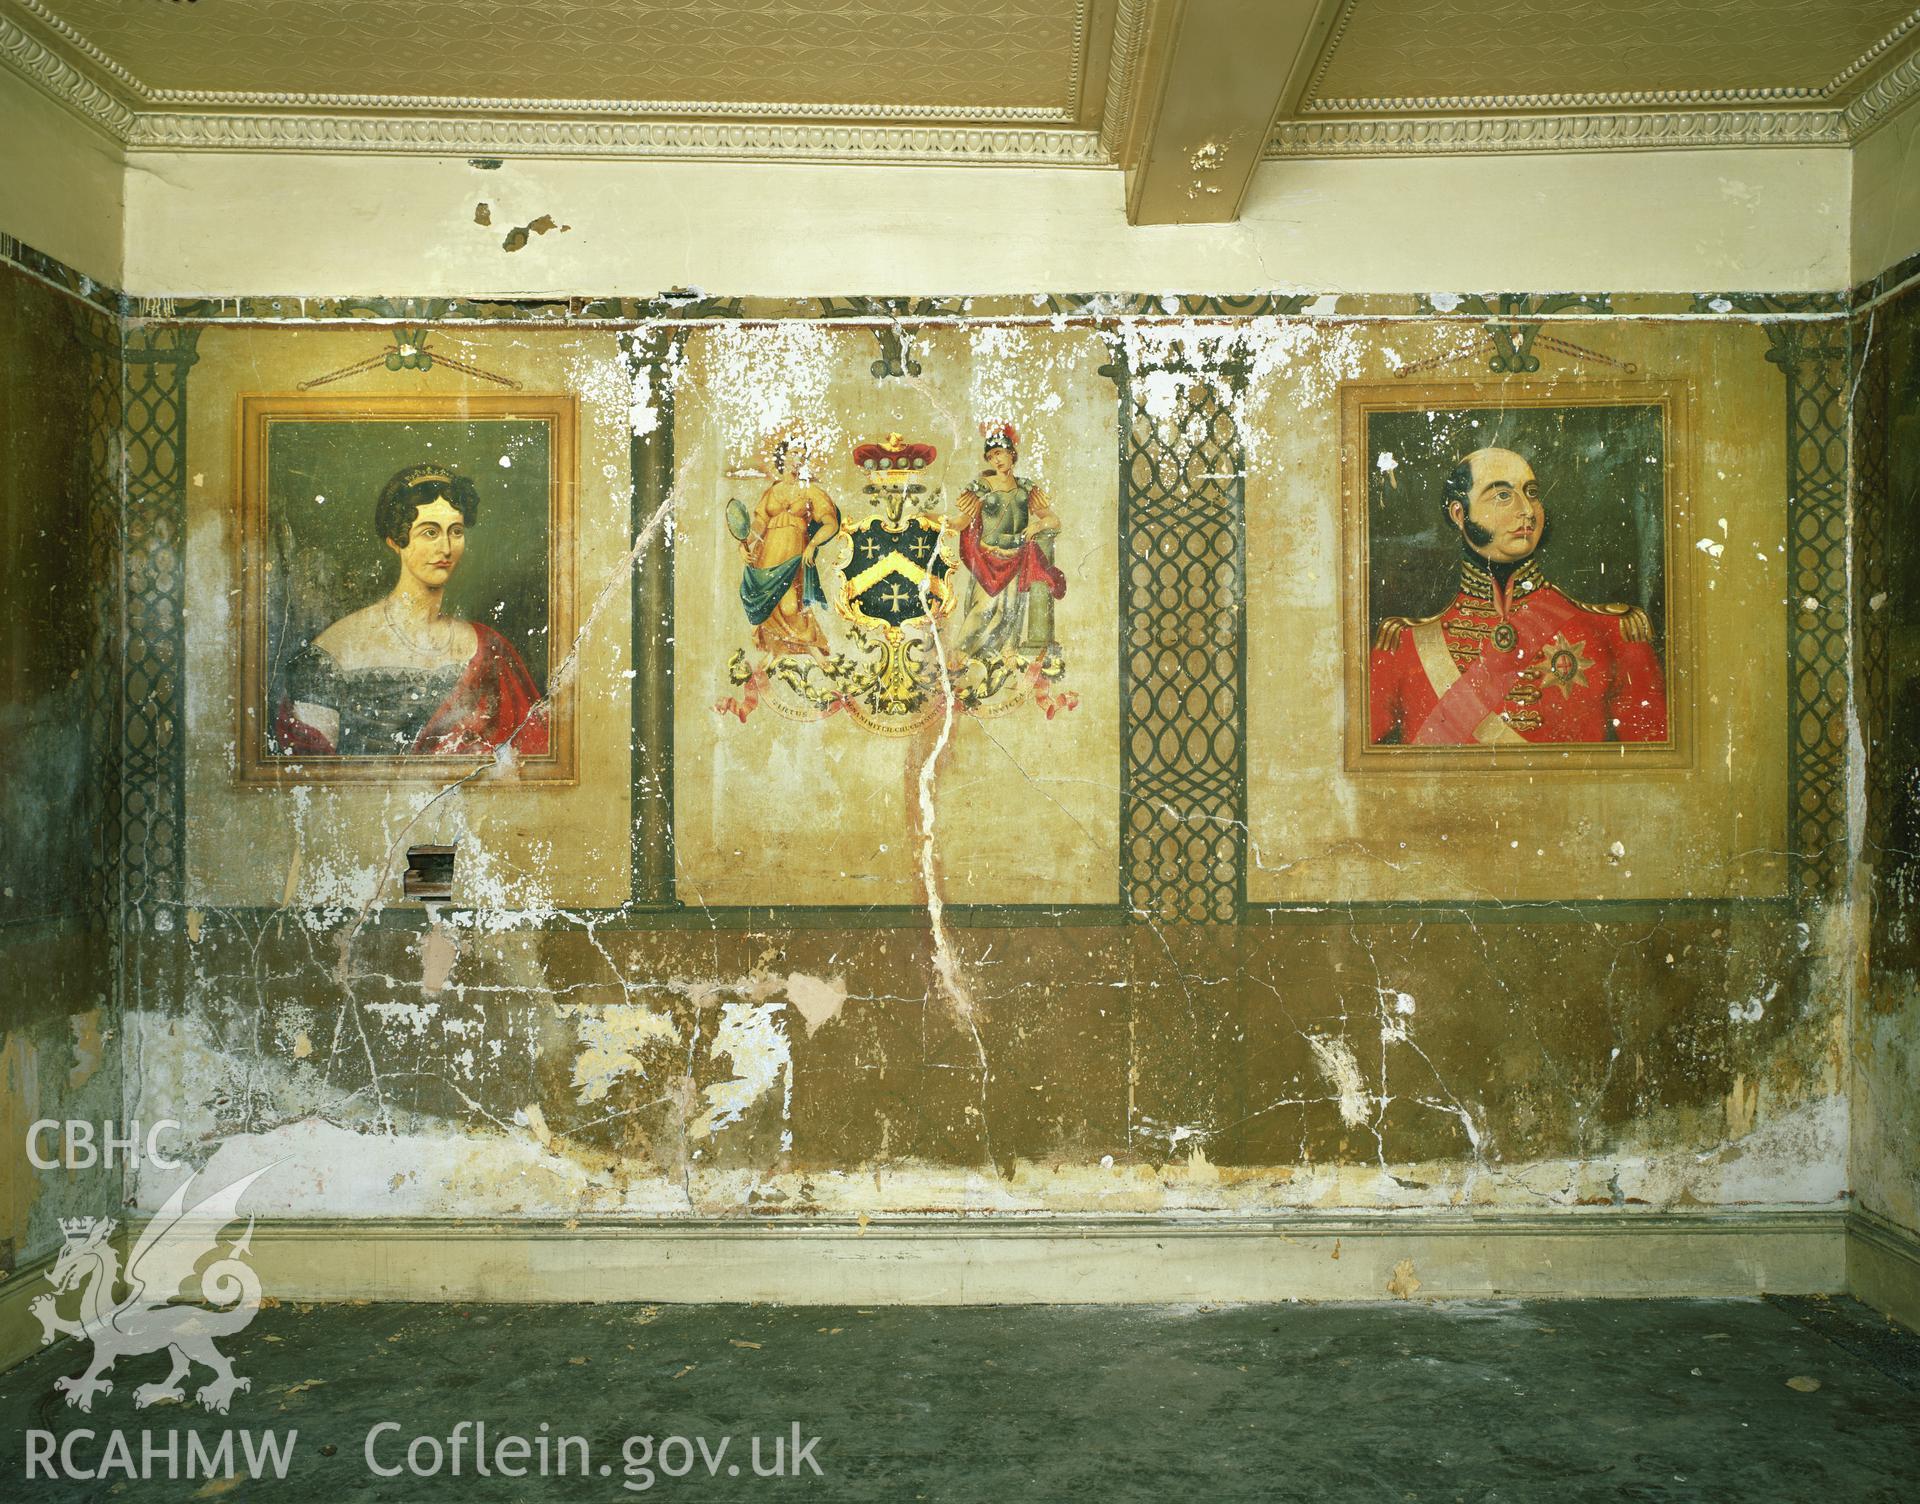 RCAHMW colour transparency showing the coat of arms and a hanging portrait at Elwy Bank, St Asaph, photographed by Iain Wright, November 2003.